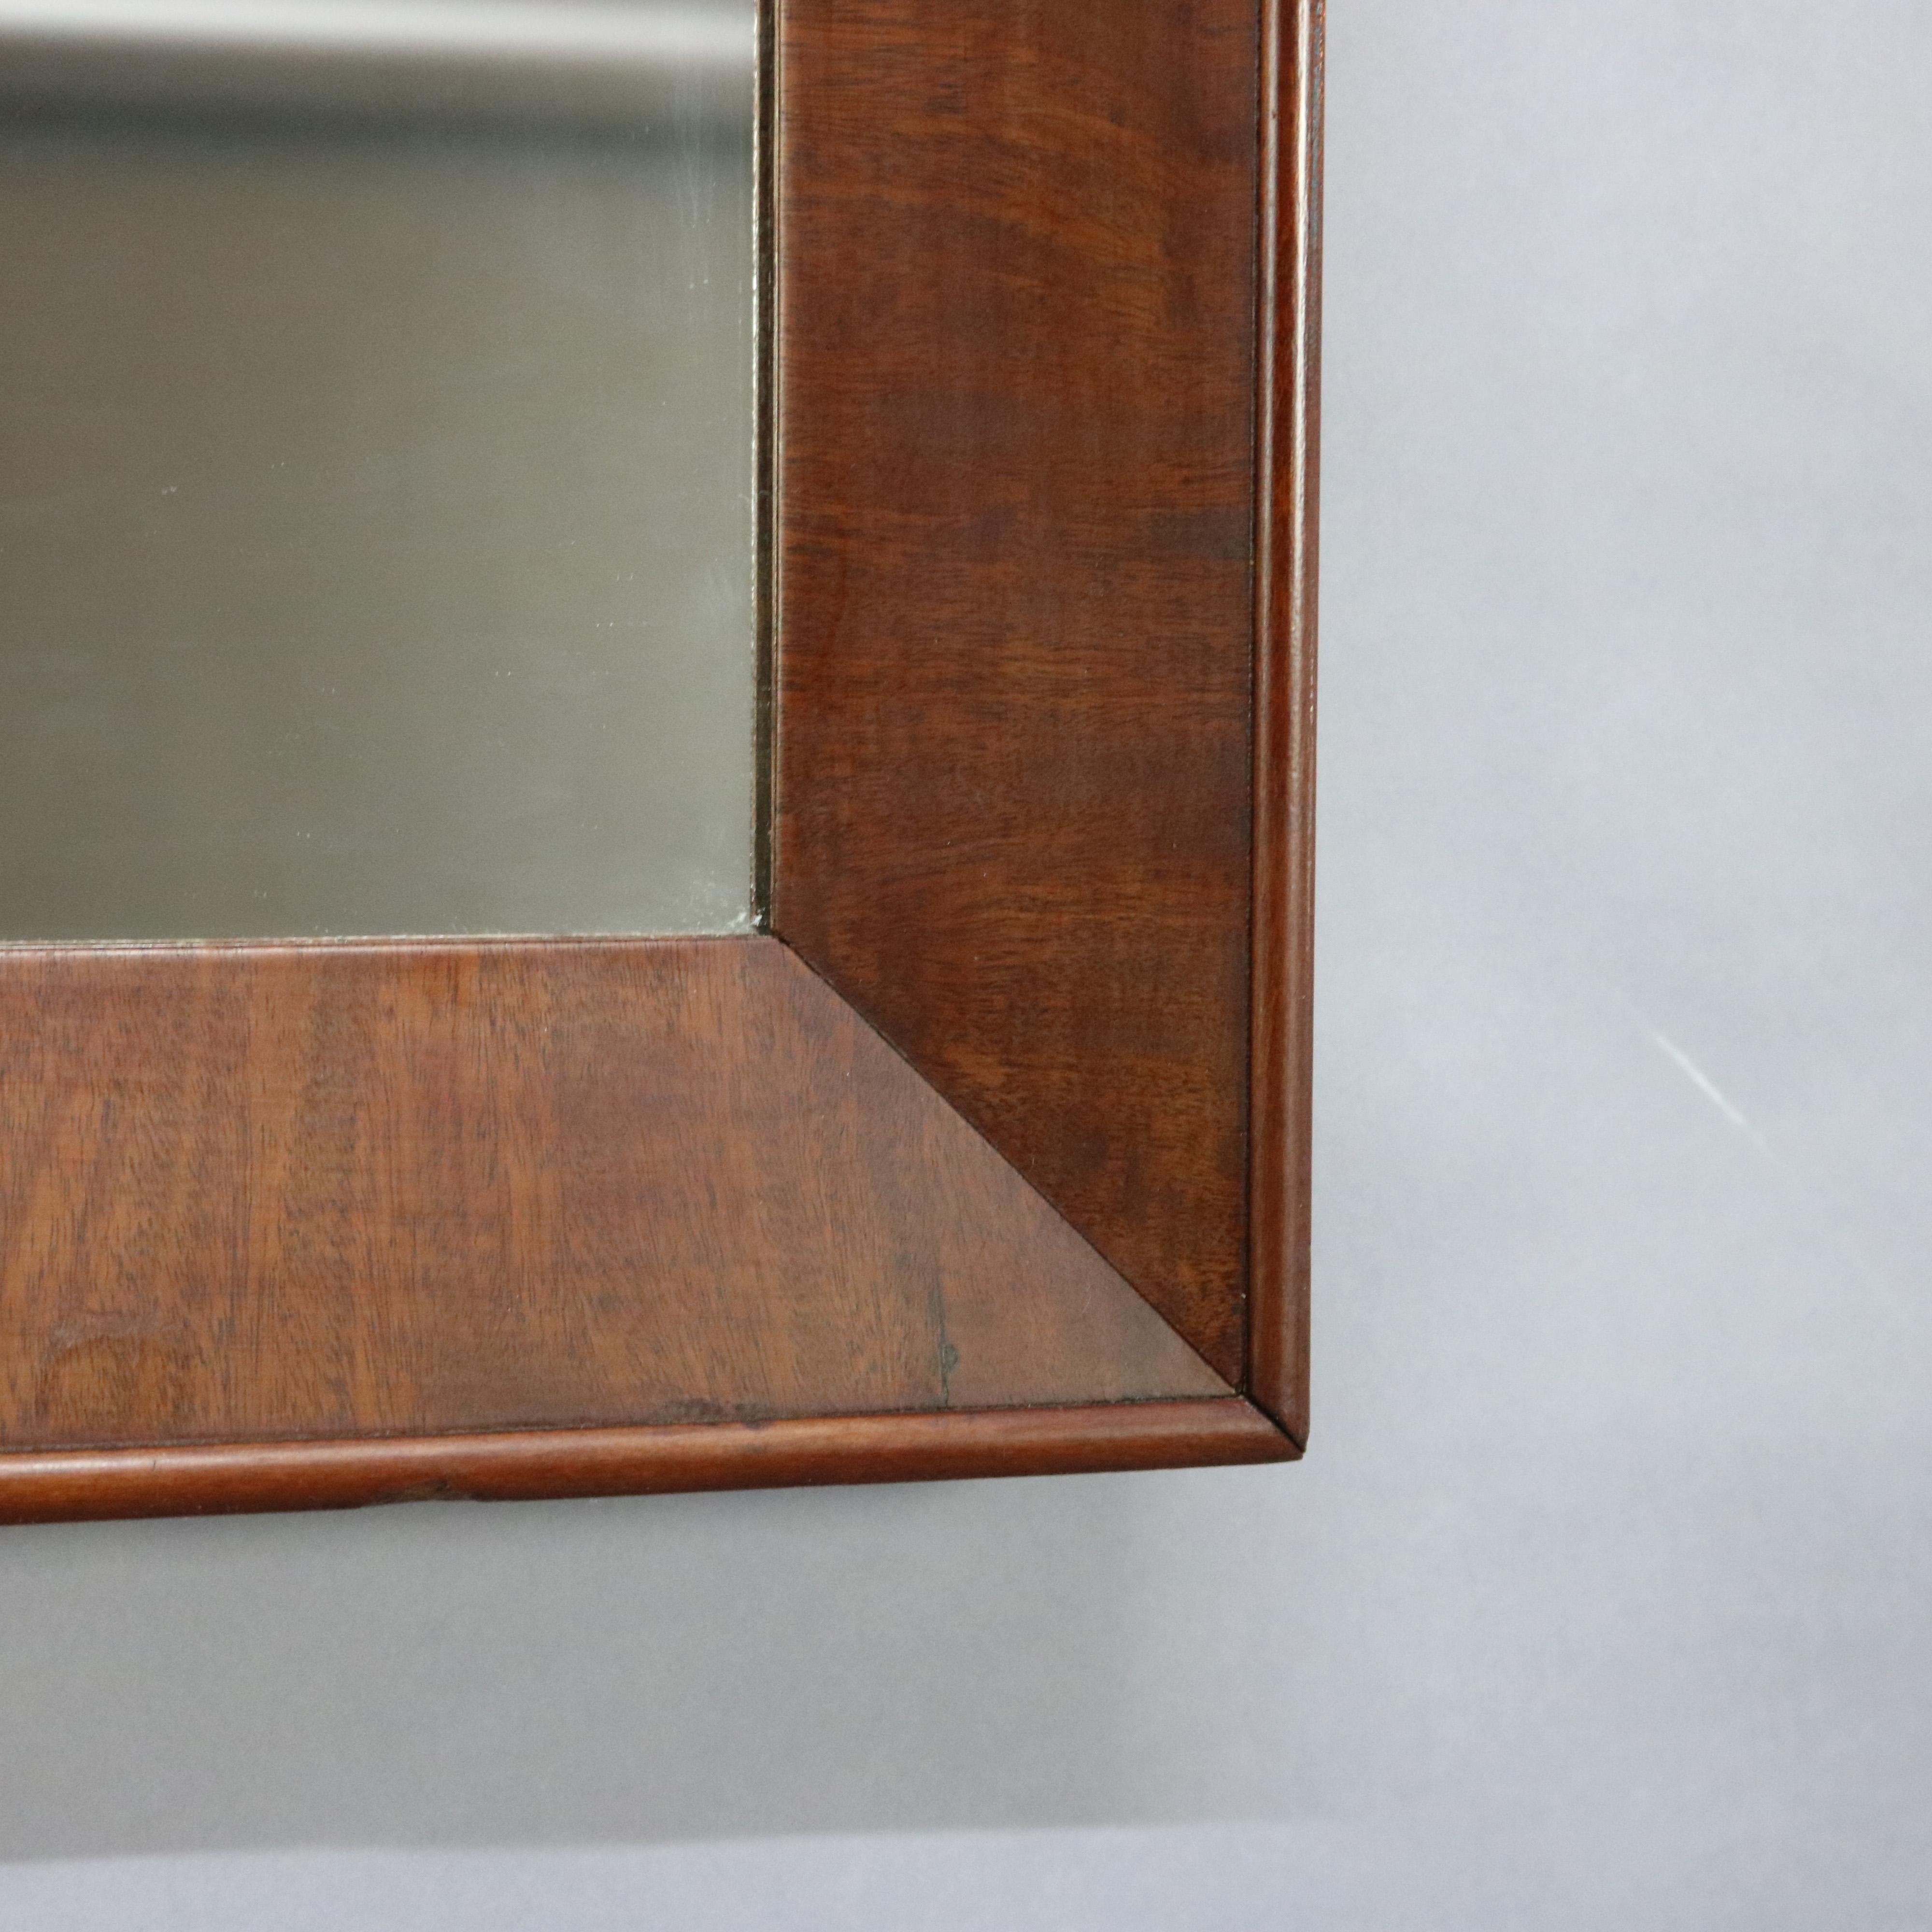 Antique American Empire Englomise Flame Mahogany Trumeau Wall Mirror, c1840 For Sale 4